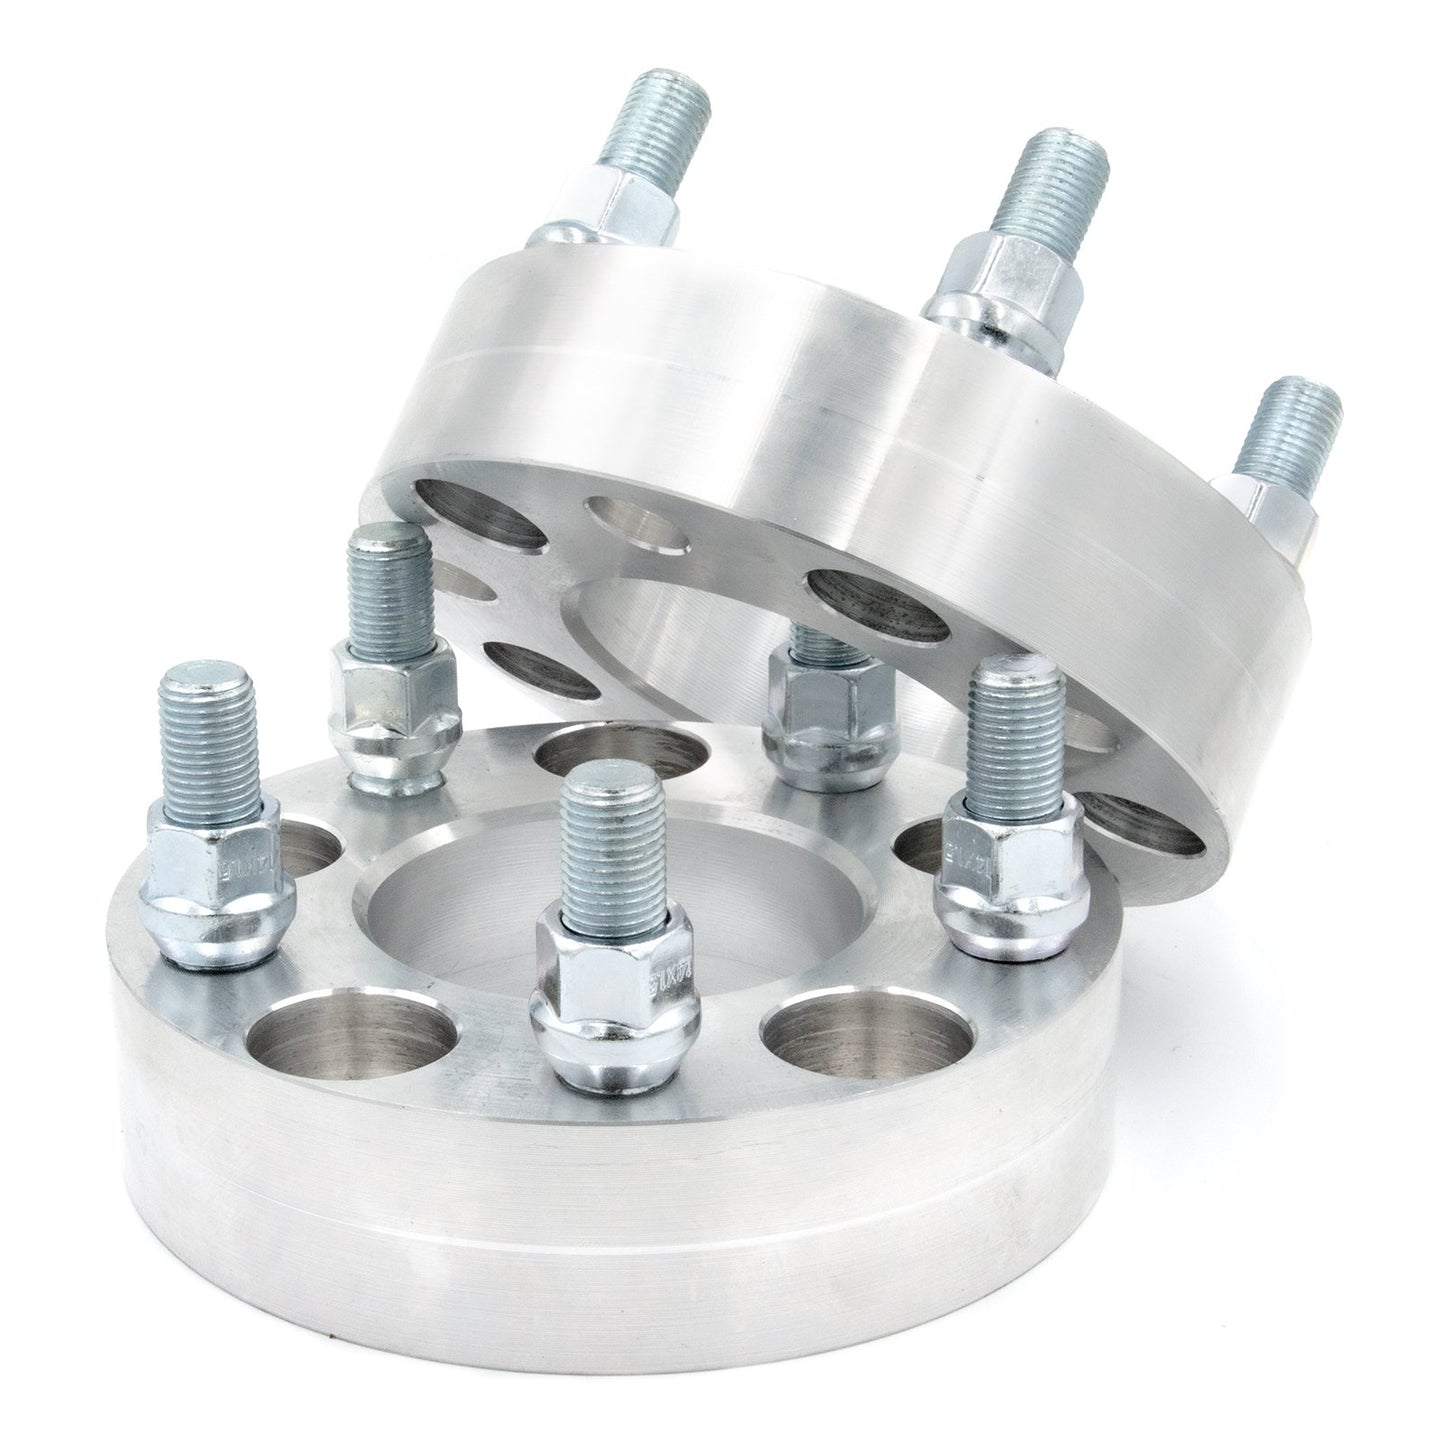 5x98 to 5x115 Wheel Spacer/Adapter - Thickness: 3/4"- 4"